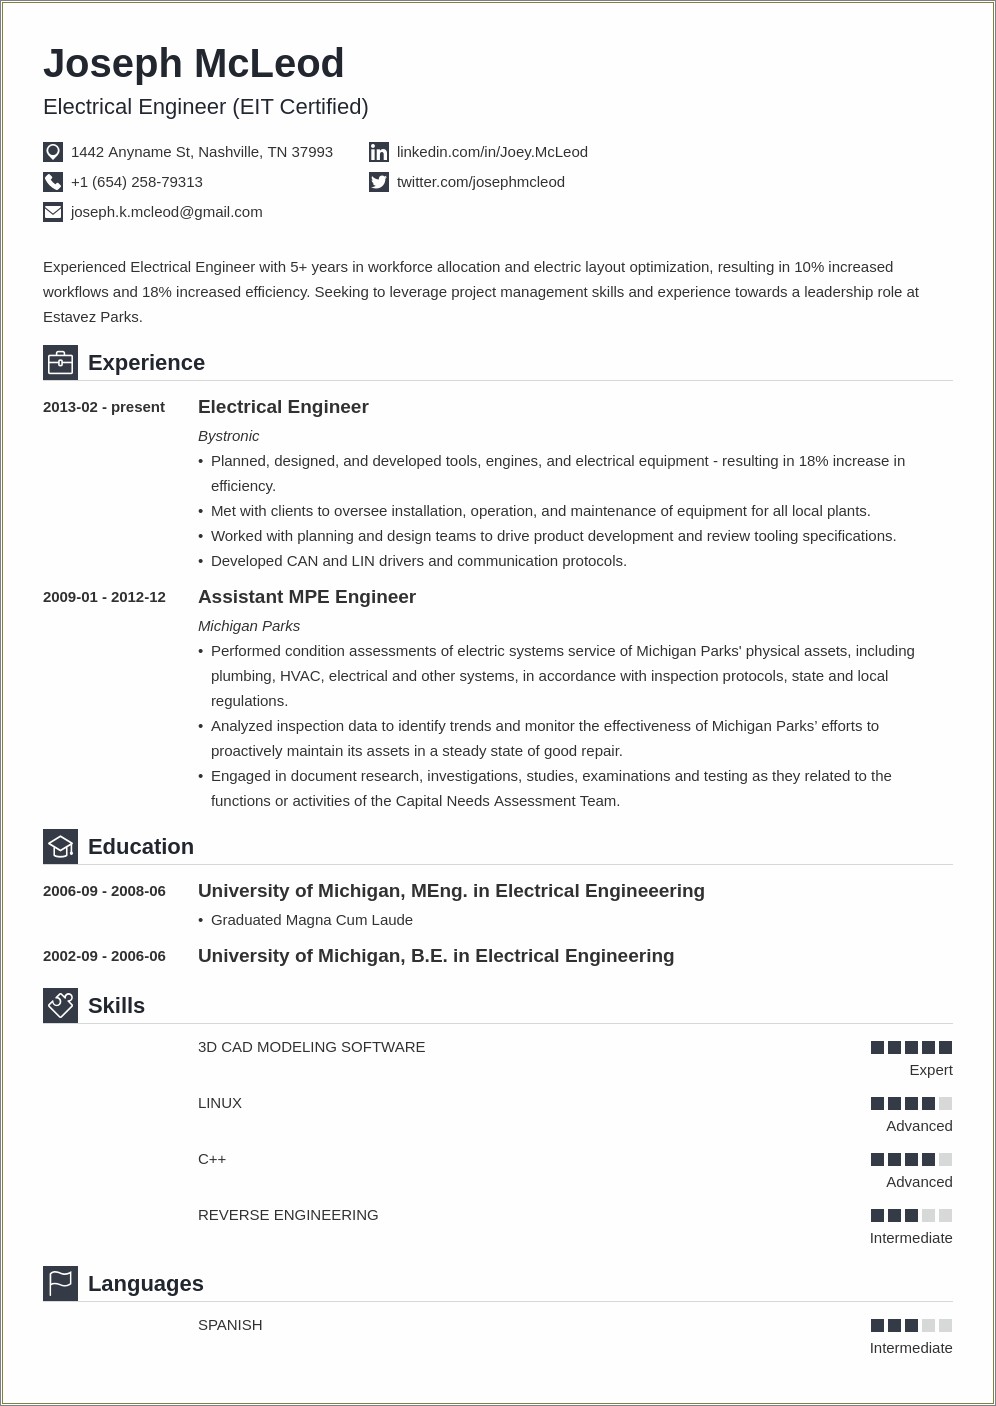 Best Summery For Electrical Engineering Resume